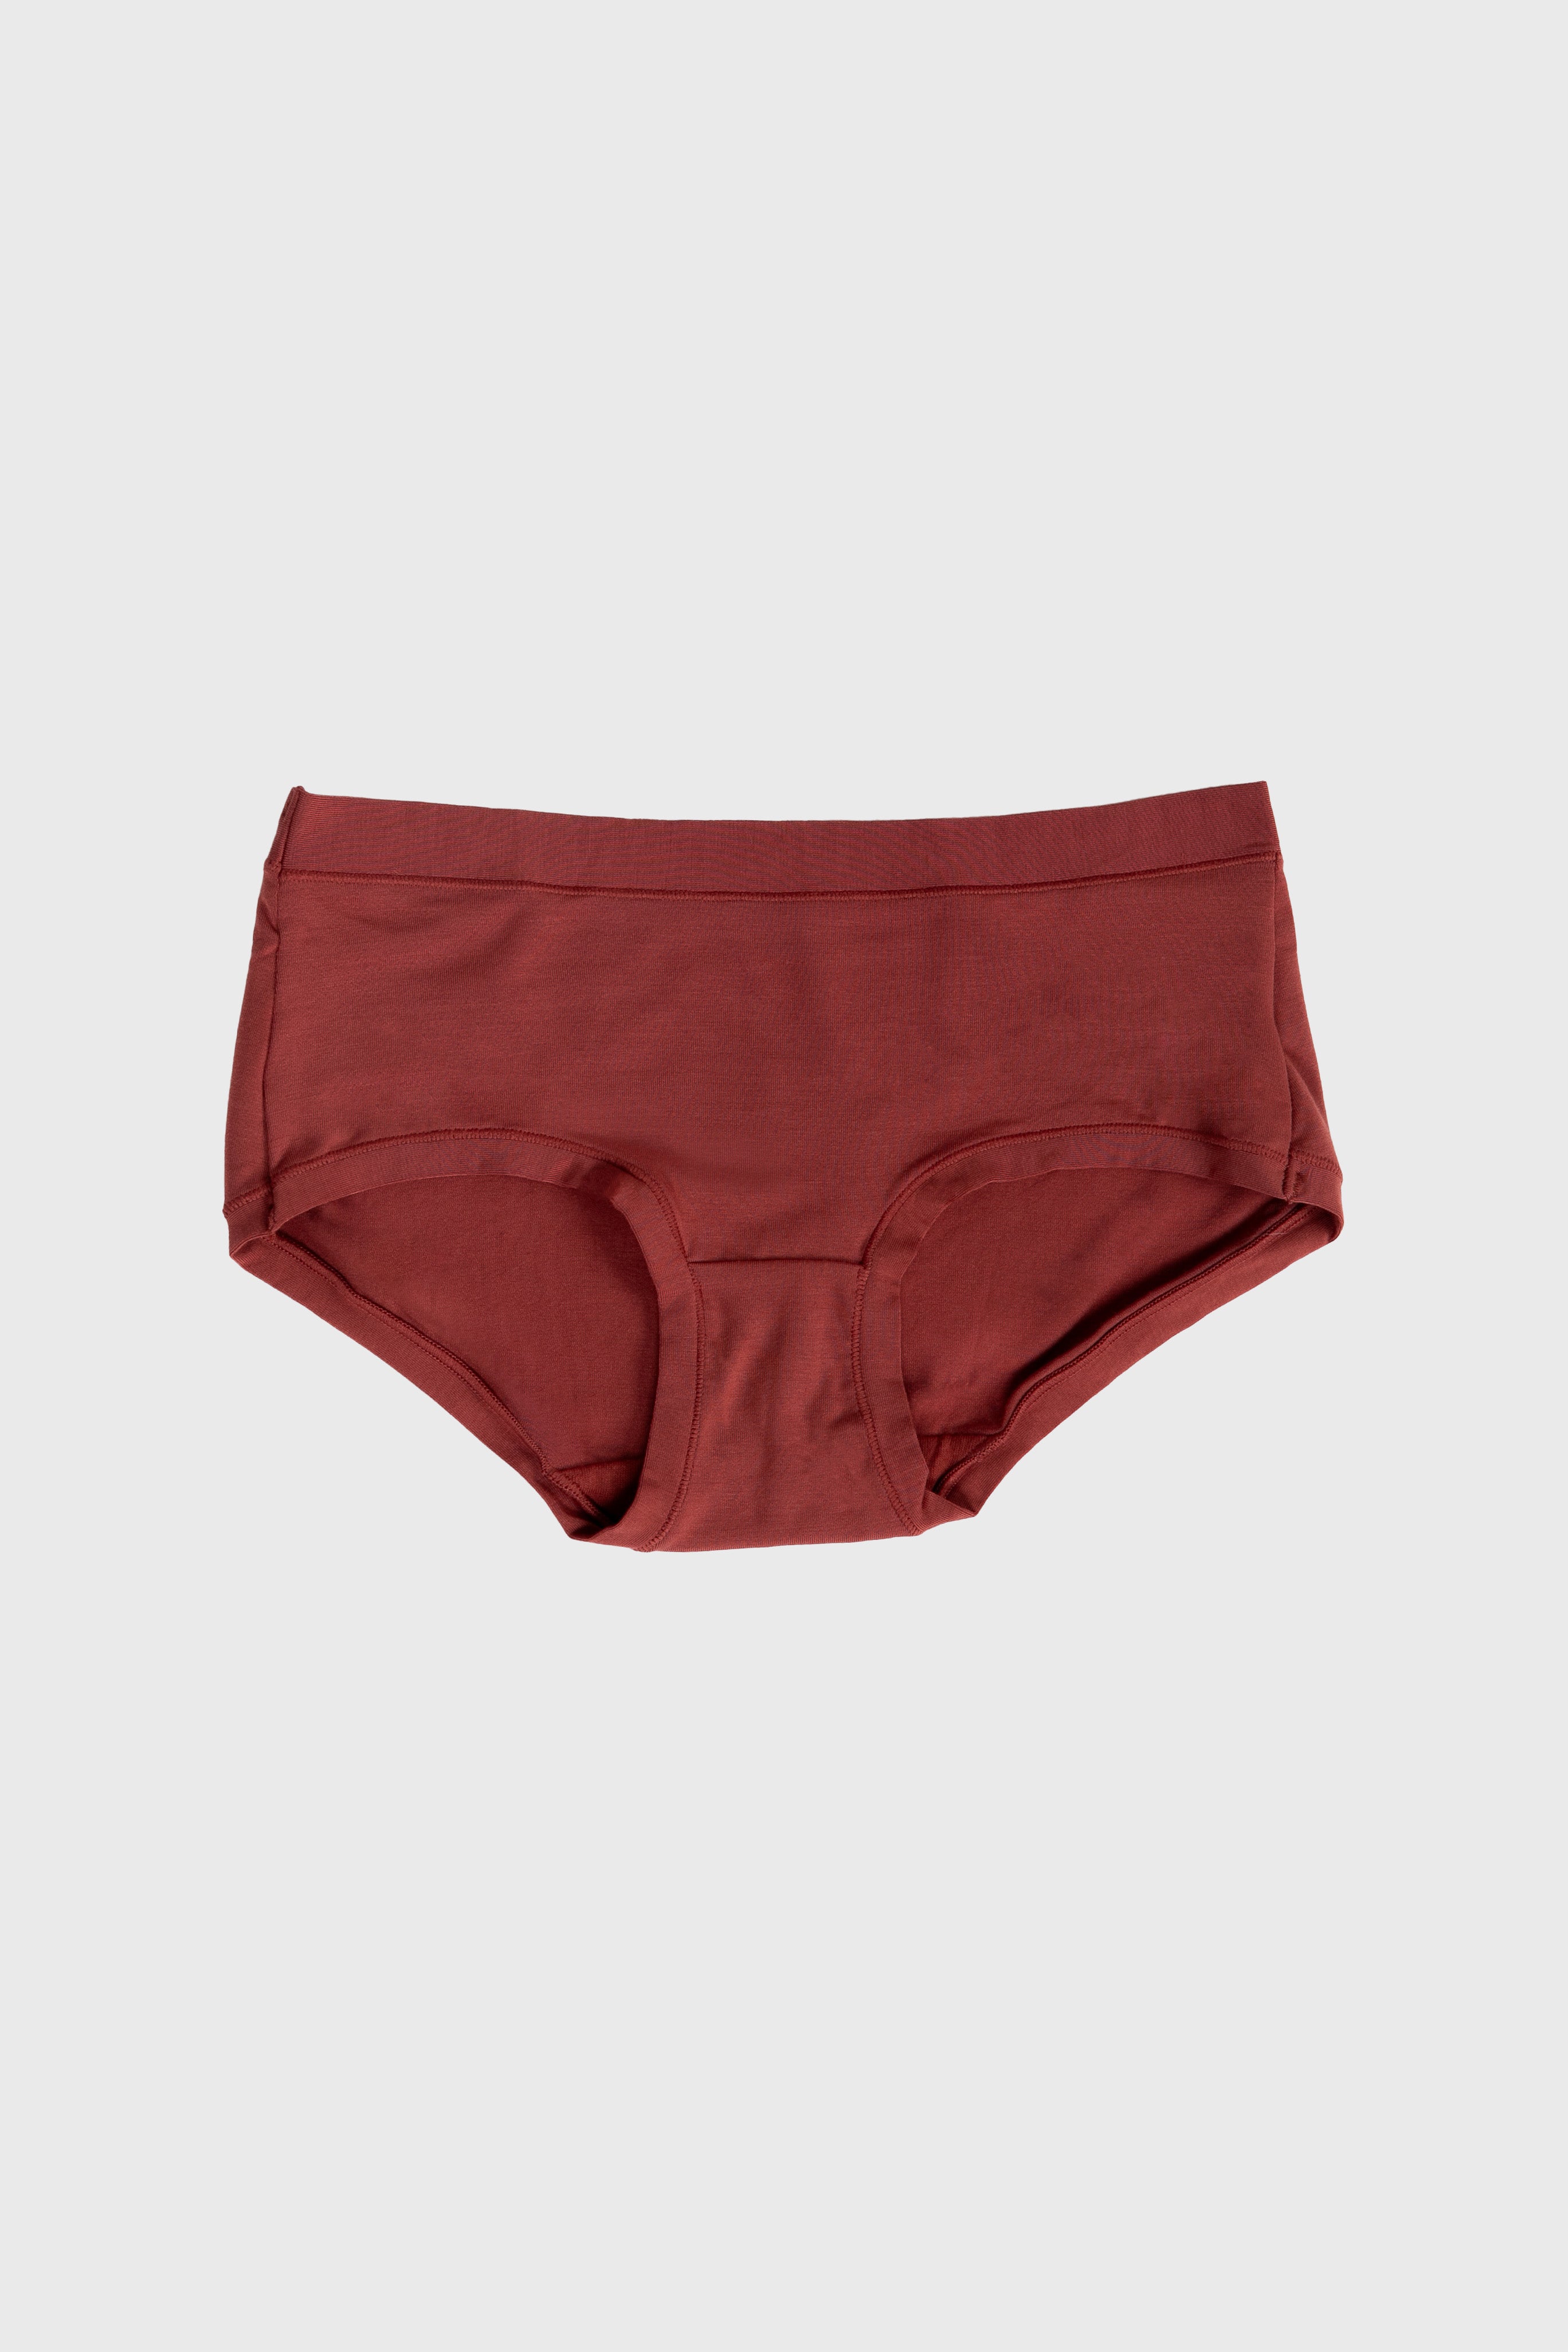 The Cotton Bare Panty in Color Bundle